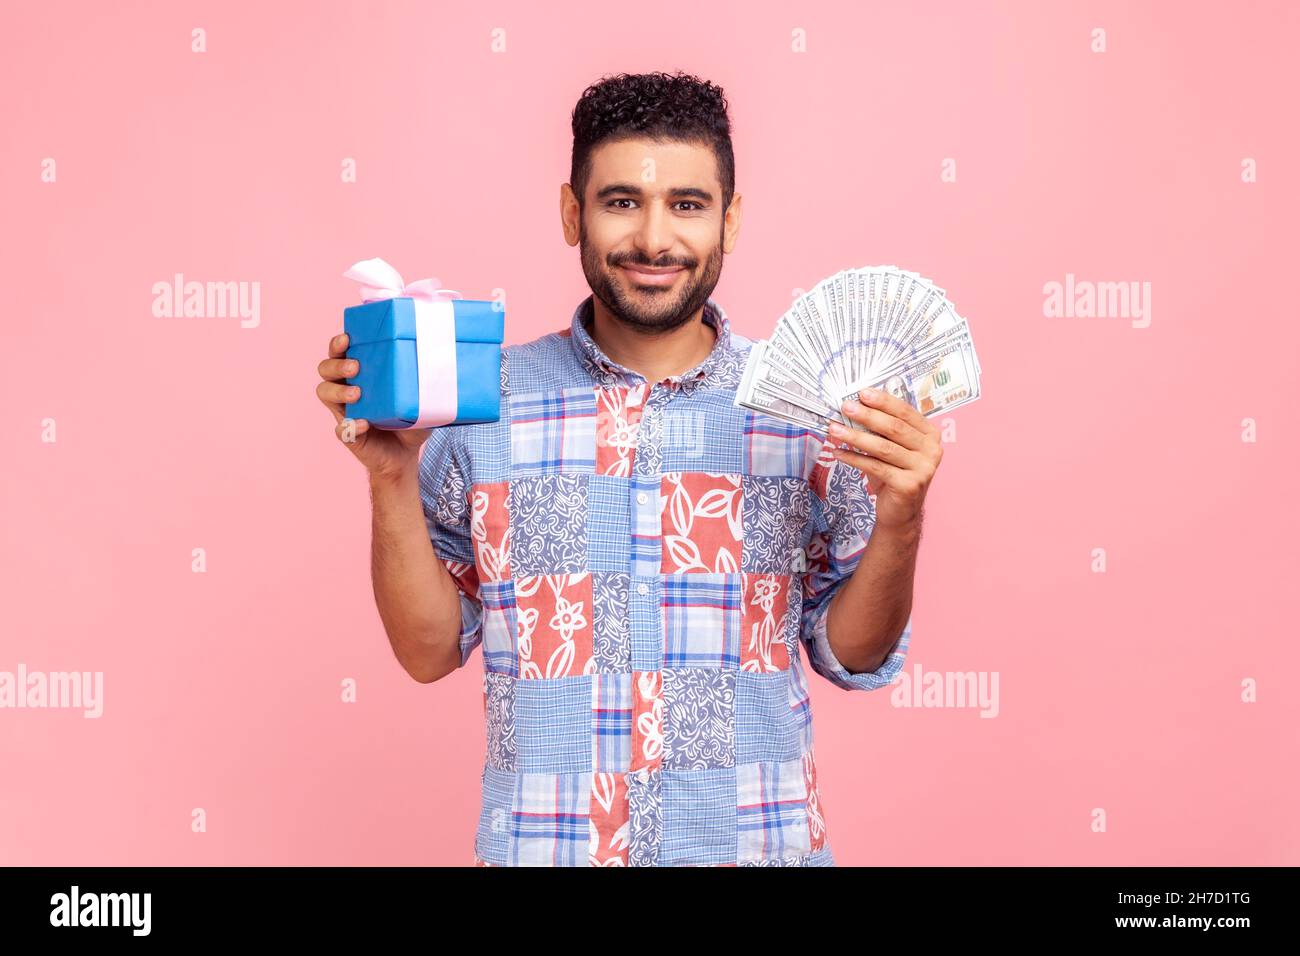 Buying holiday gifts, shopping. Bearded man in blue casual shirt holding wrapped present box and money dollars, looking at camera smiling satisfied. Indoor studio shot isolated on pink background. Stock Photo